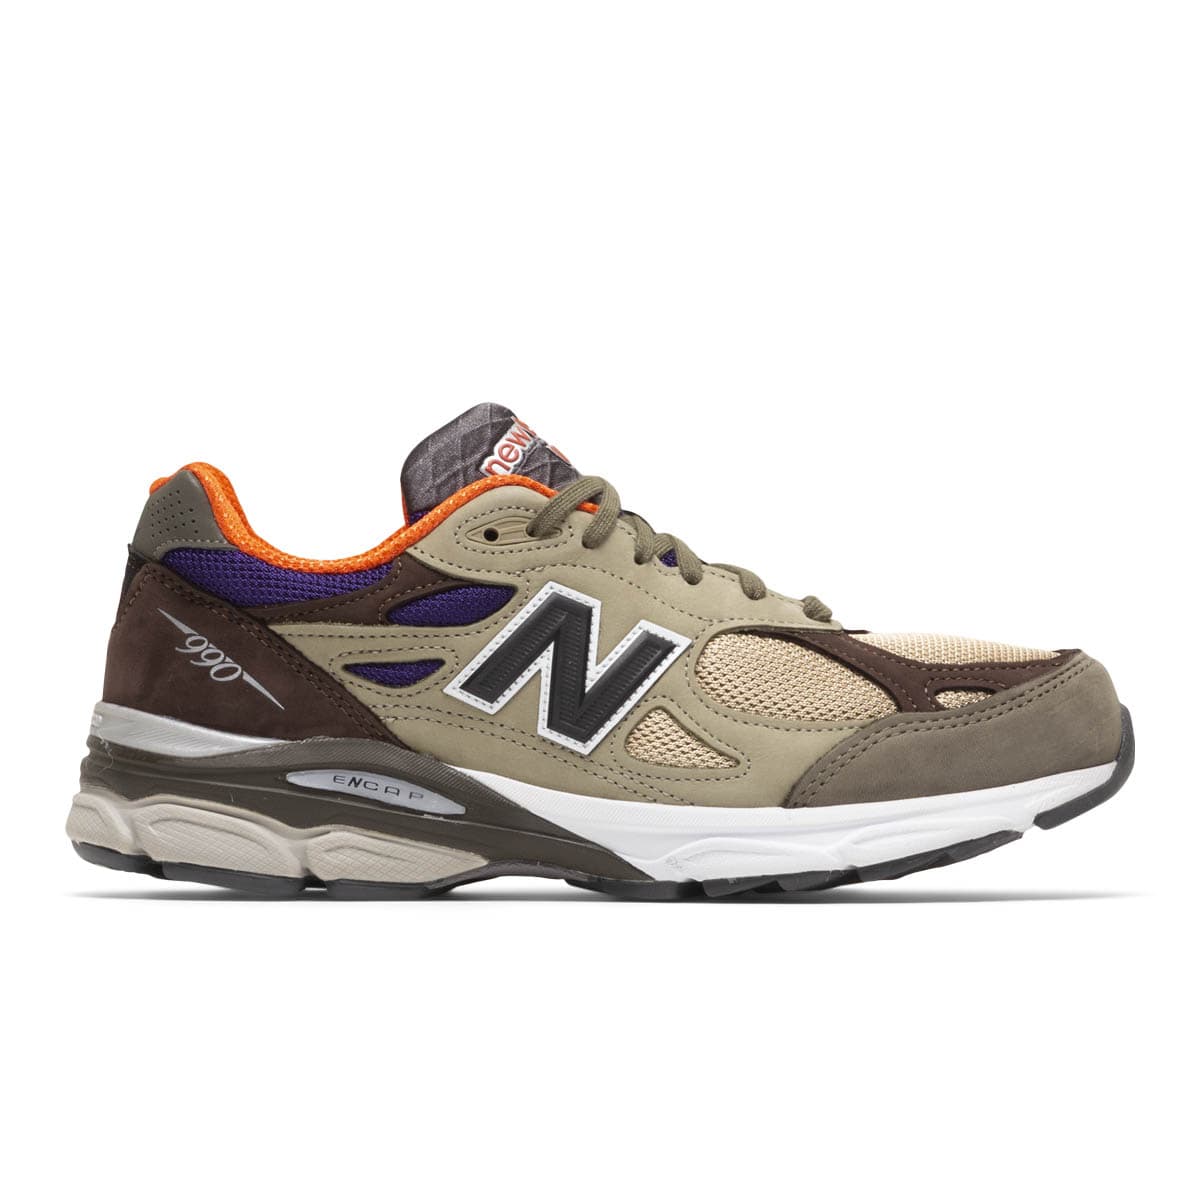 New Balance Sneakers MADE IN USA M990BT3